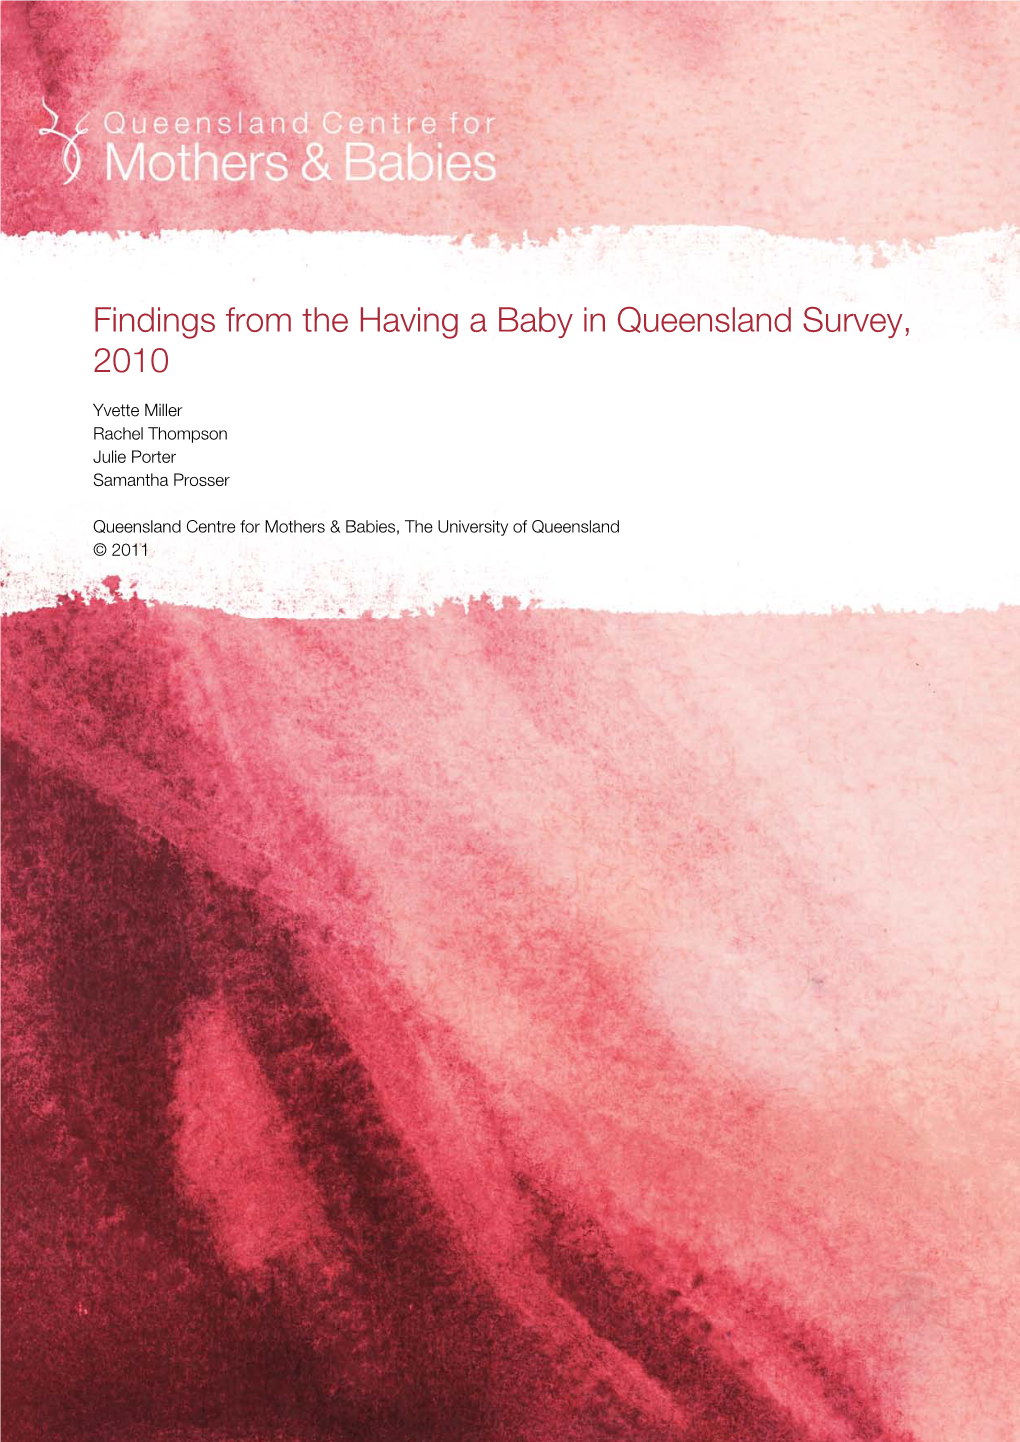 Findings from the Having a Baby in Queensland Survey, 2010